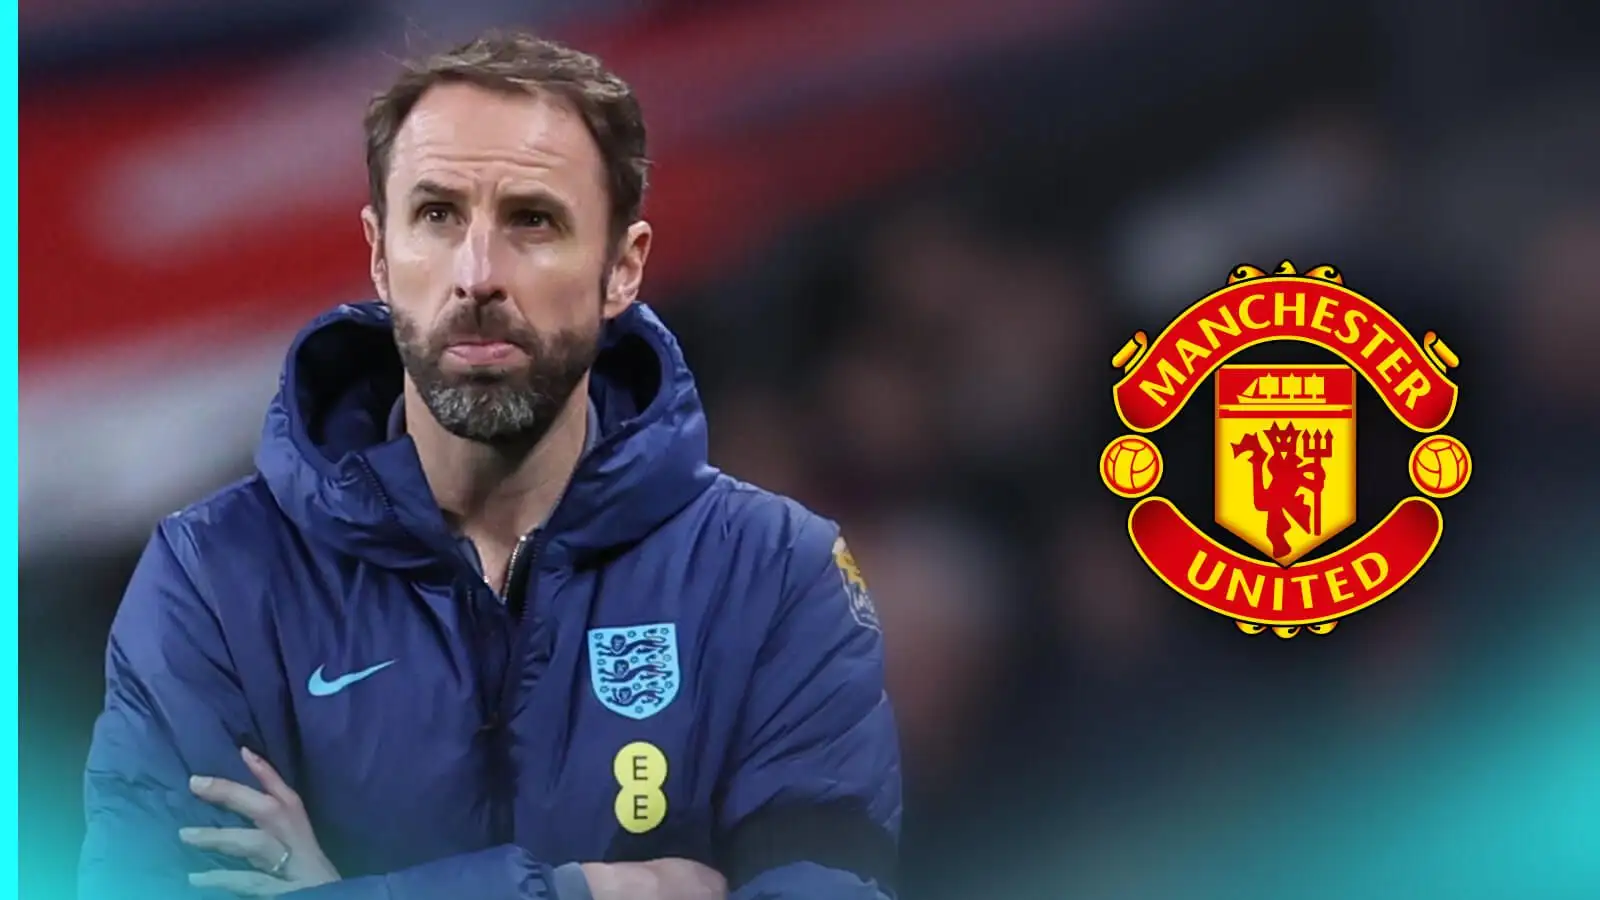 England supervisor Gareth Southgate and the Manchester Joined badge